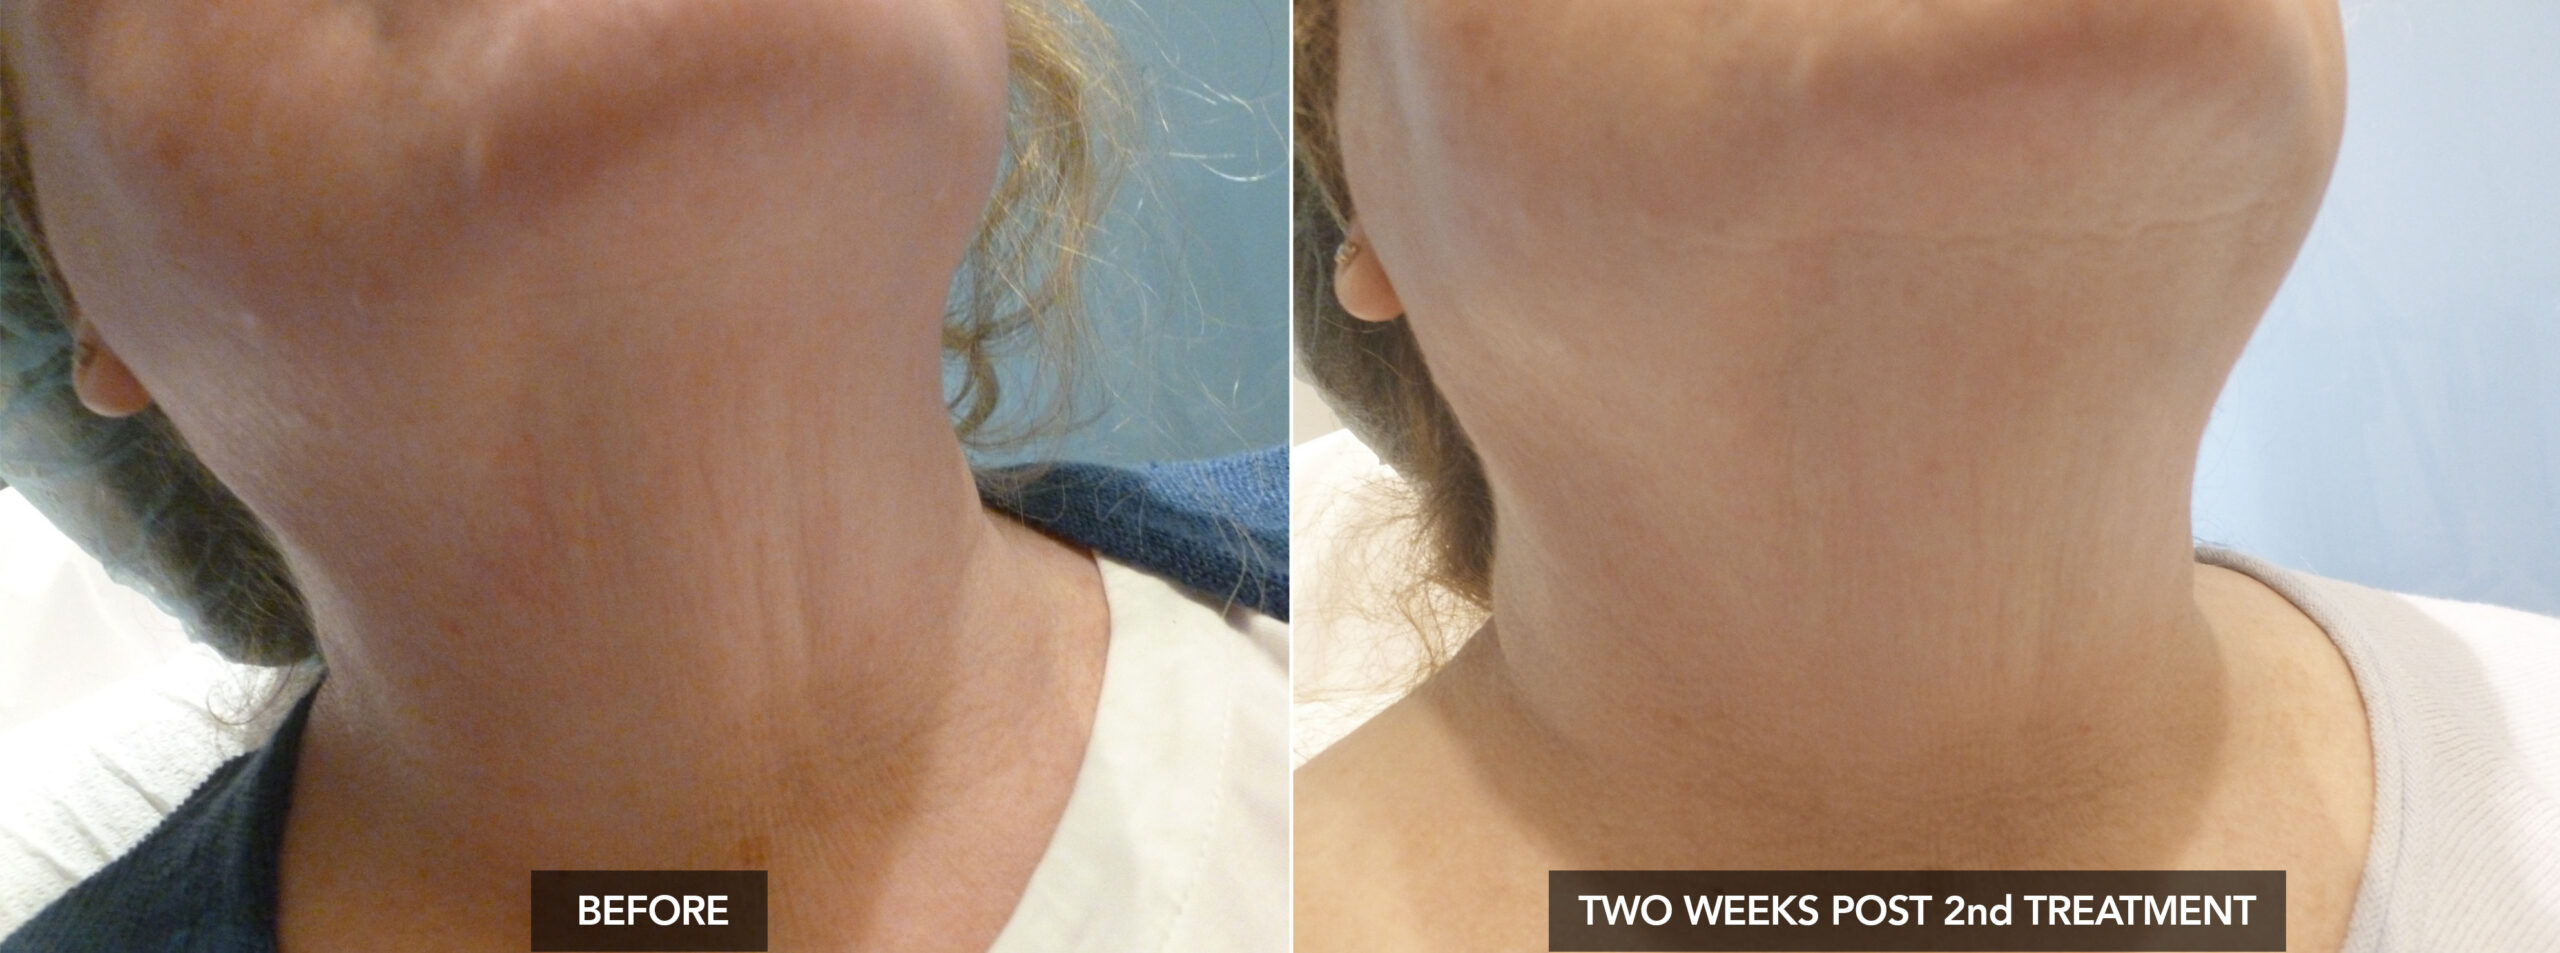 VIRTUERF NECK BEFORE & TWO WEEKS AFTER 2ND TREATMENT